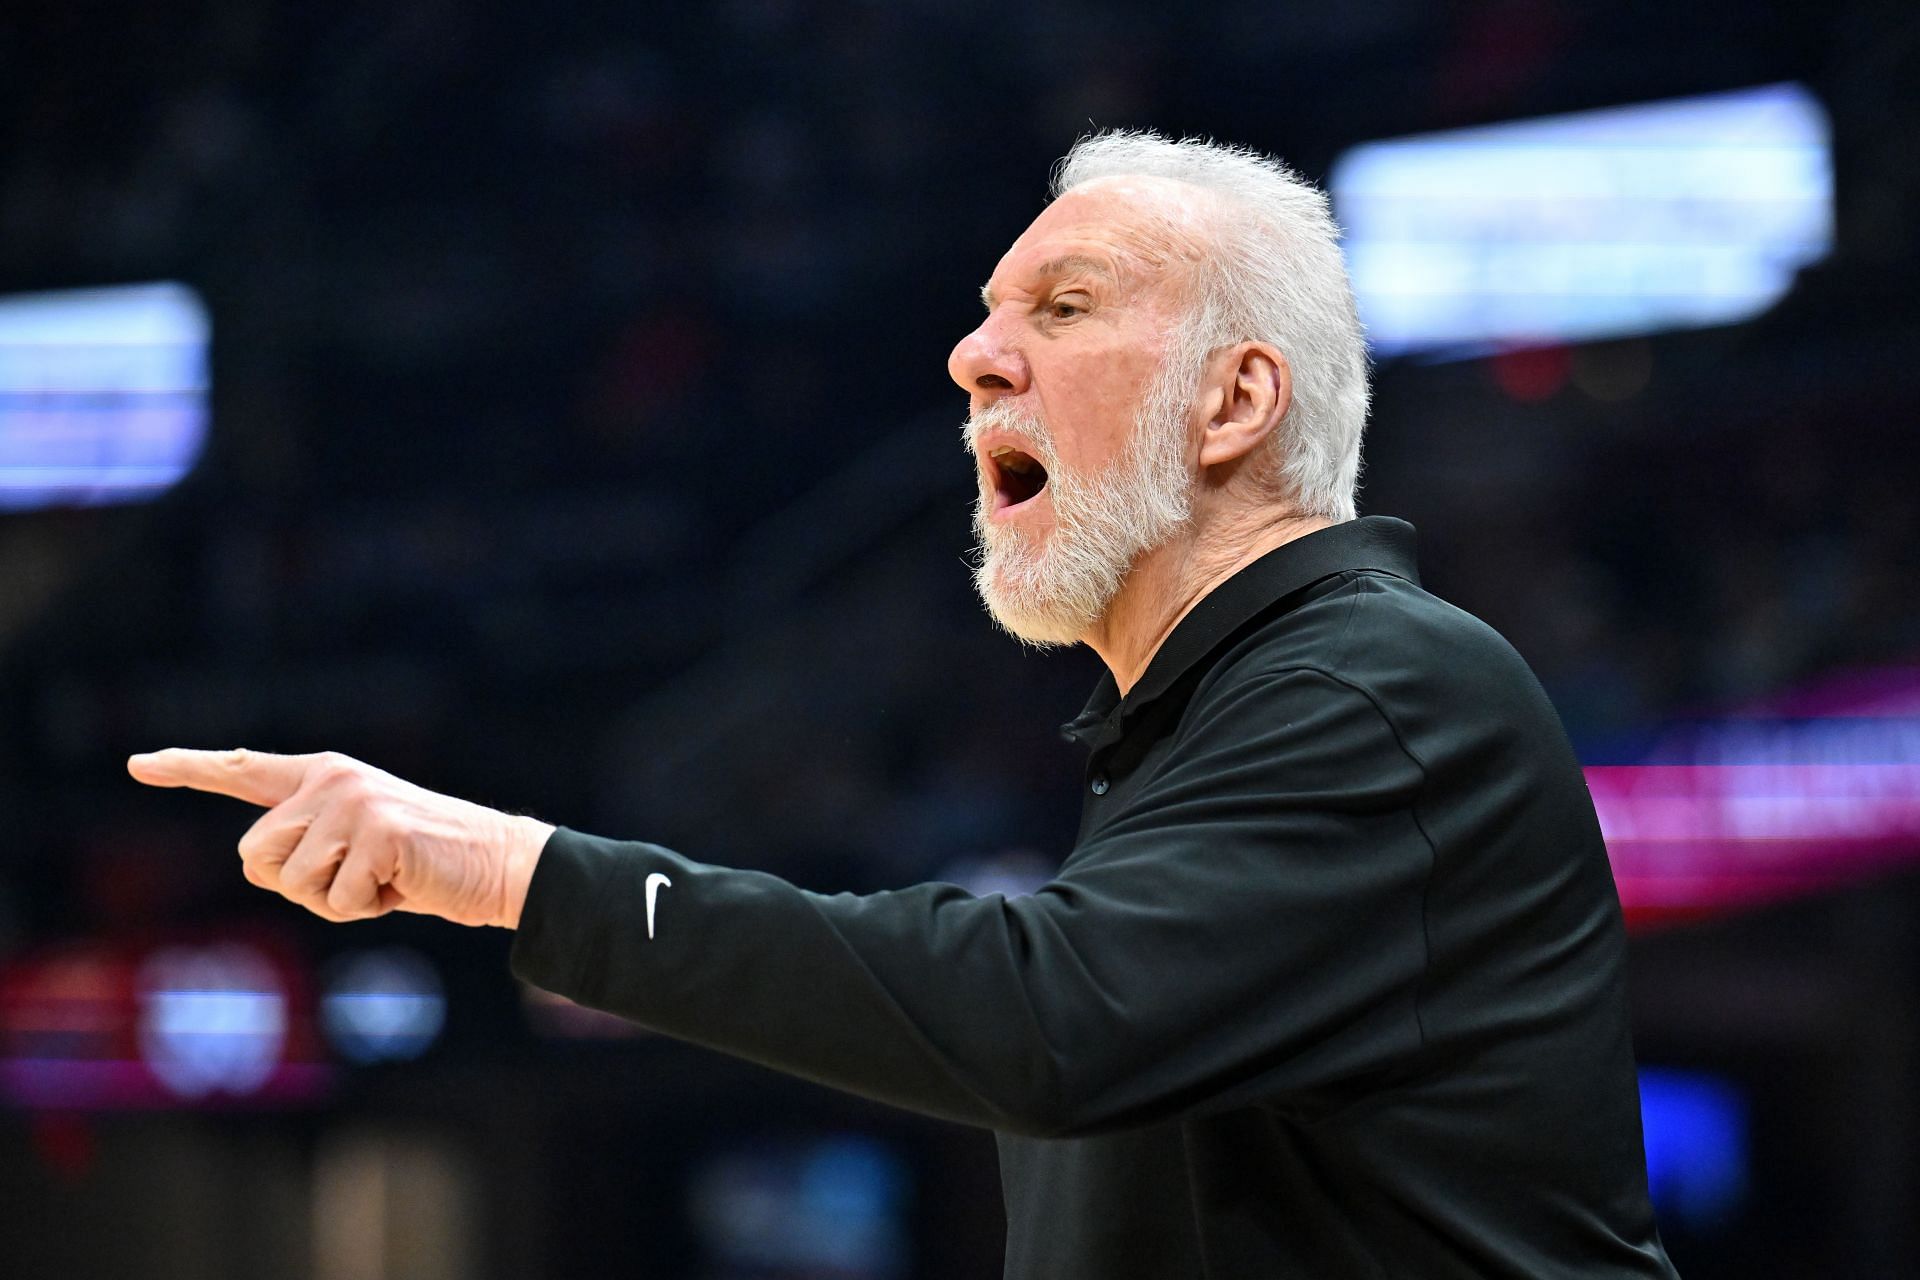 Gregg Popovich turned the Spurs into one of the most successful NBA teams (Image via Getty Images)